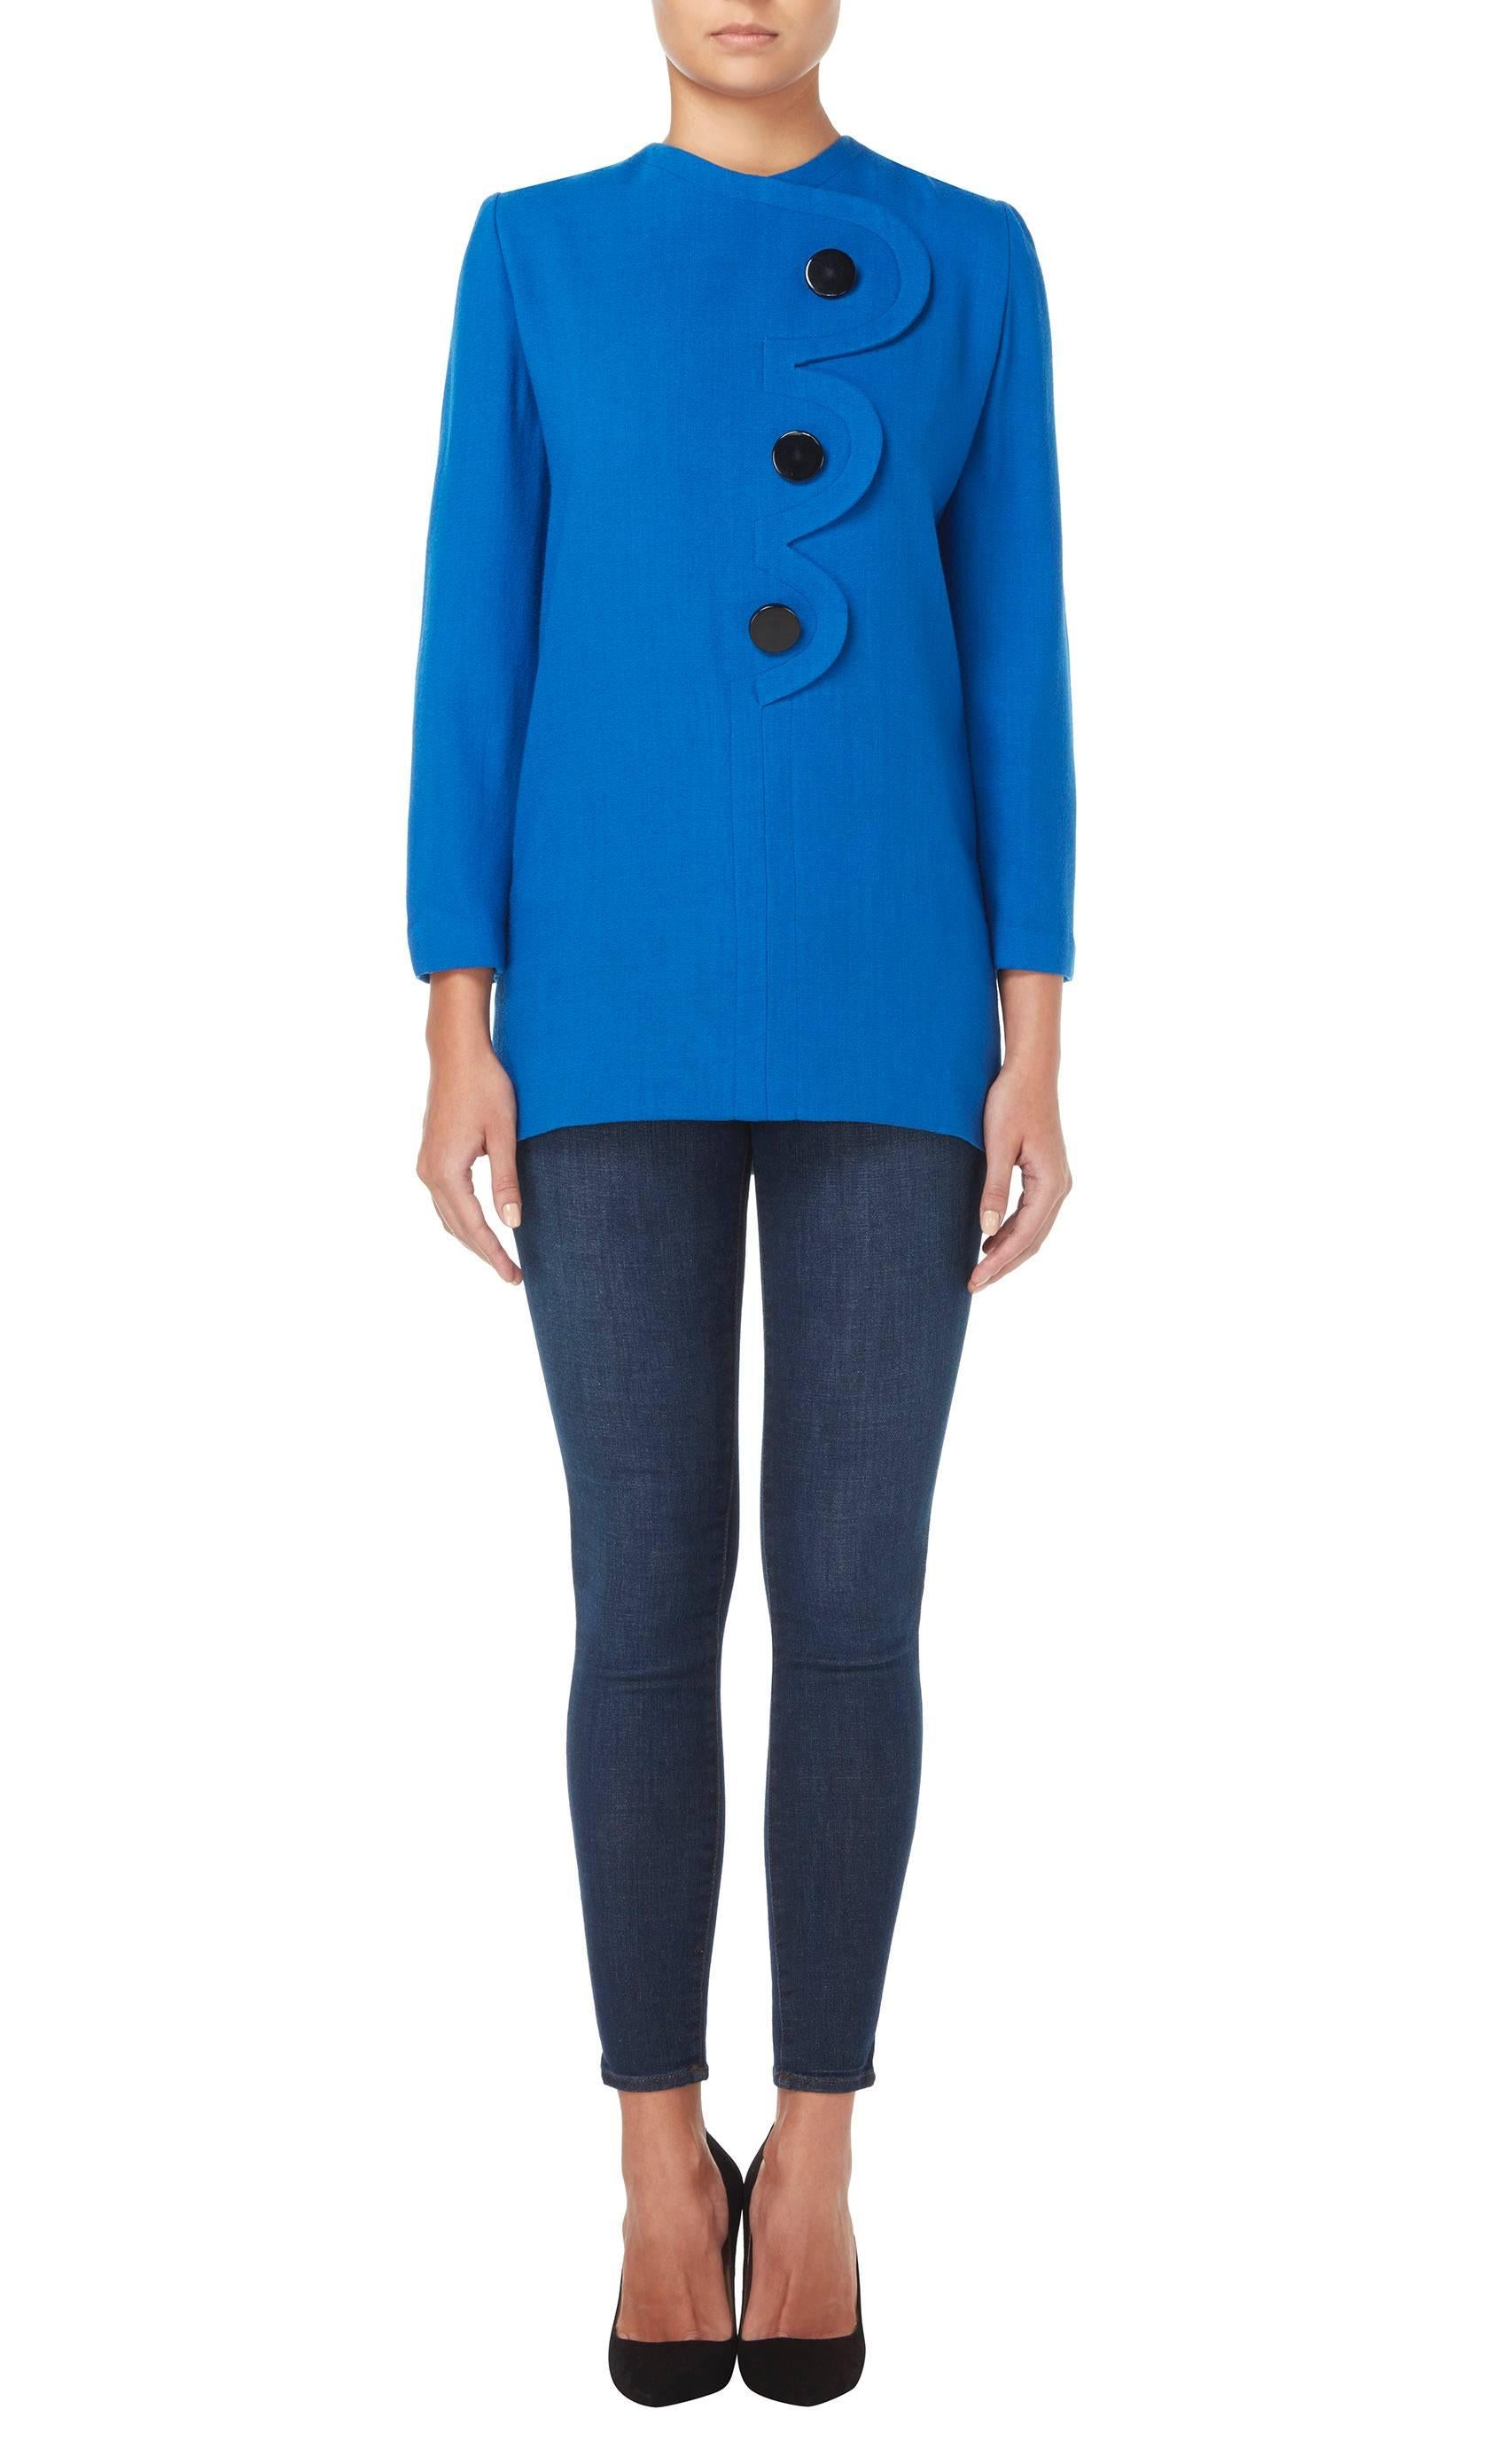 Constructed in bright blue wool crepe, this Pierre Cardin tunic top will add a pop of colour to a daytime look. With a scalloped detail and three decorative buttons to the front, this top is has a fun pop art aesthetic.

Constructed in blue wool